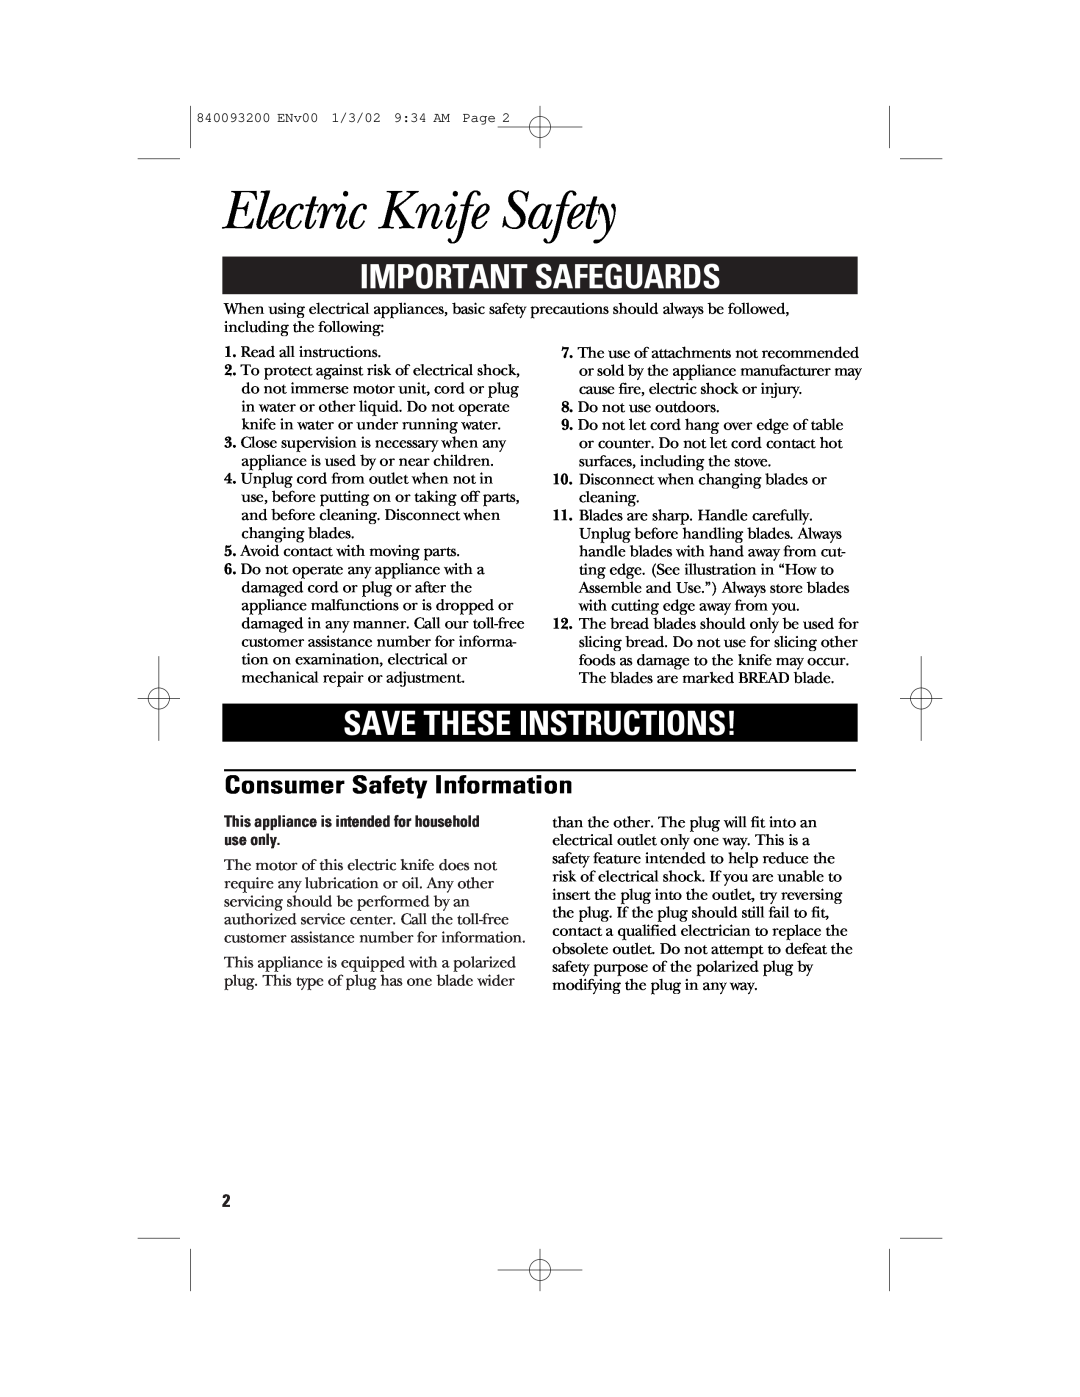 GE 840093200, 106612 Electric Knife Safety, Important Safeguards, Save These Instructions, Consumer Safety Information 